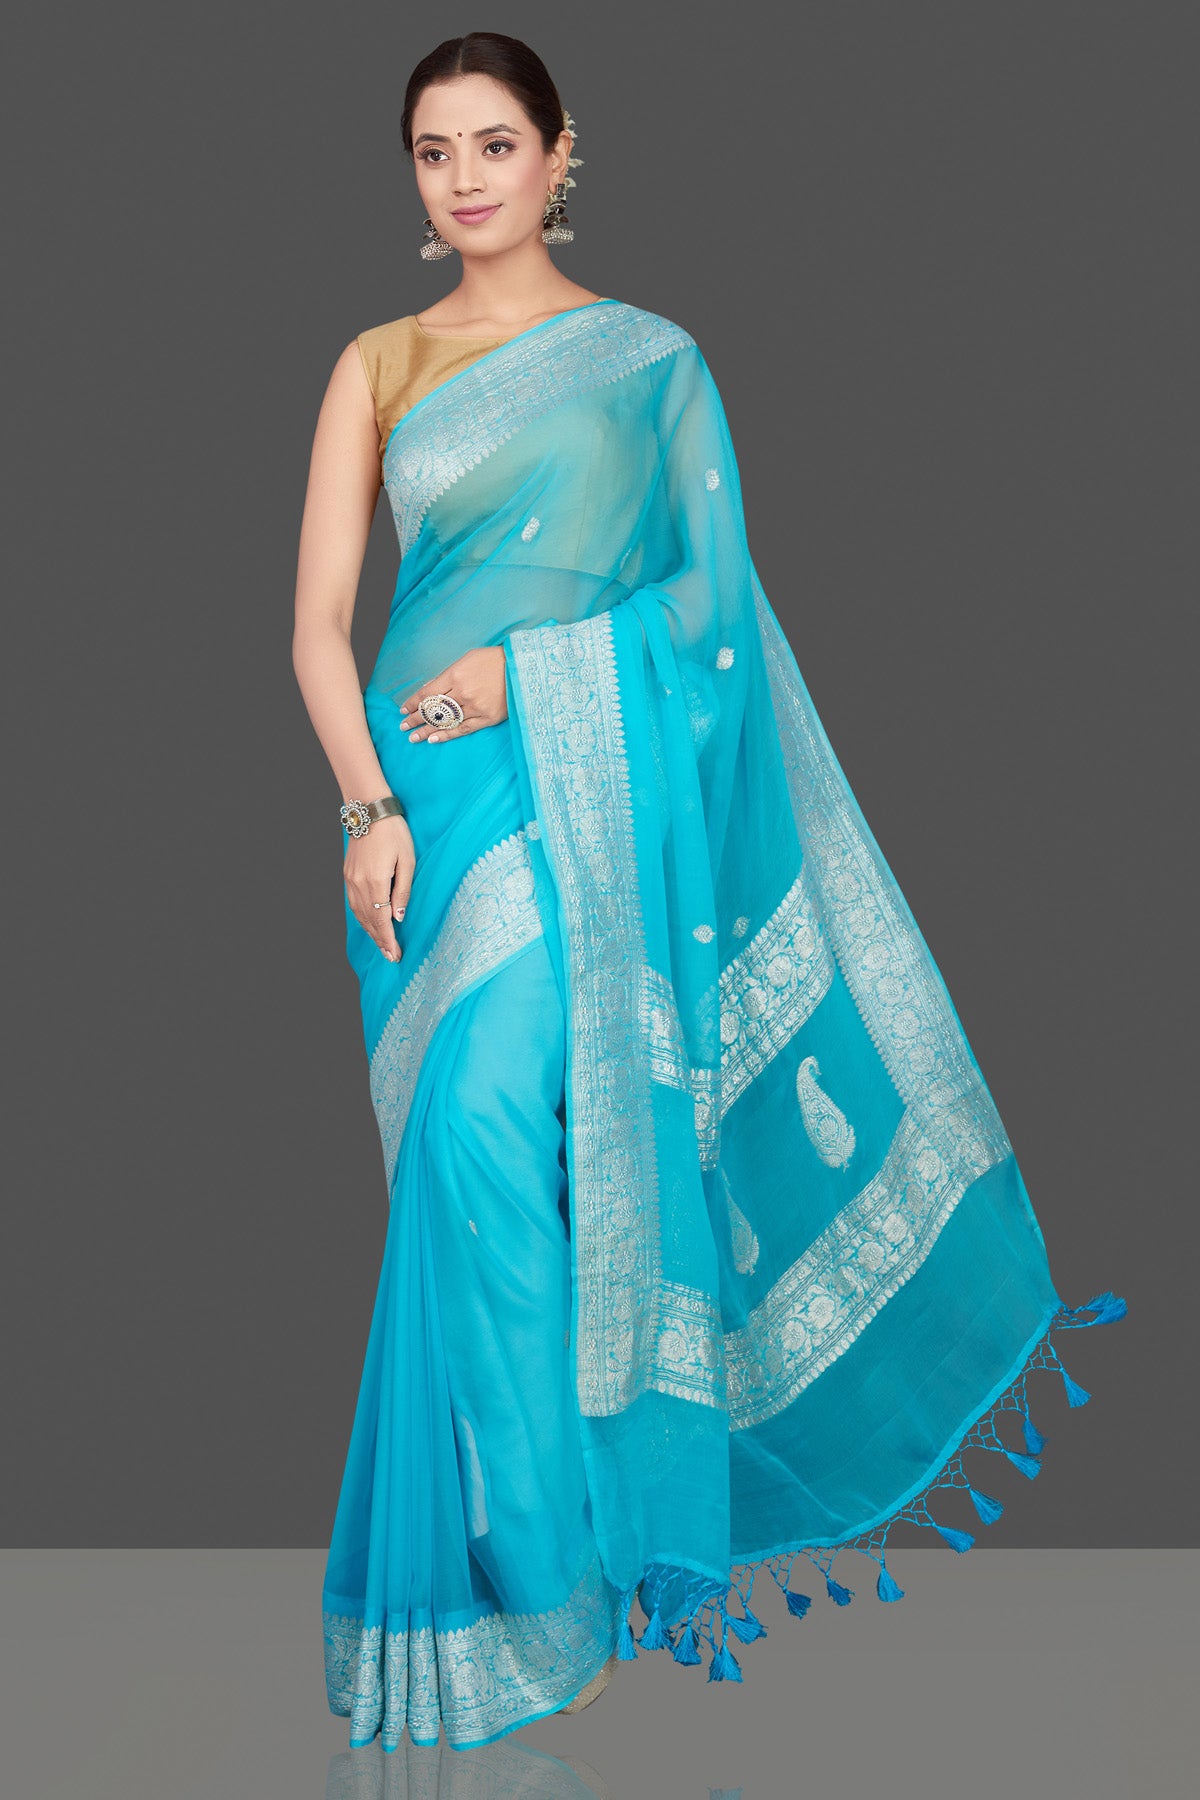 Buy beautiful sky blue chiffon georgette sari online in USA with silver zari border. Go for stunning Indian designer sarees, georgette sarees, handwoven saris, embroidered sarees for festive occasions and weddings from Pure Elegance Indian clothing store in USA.-full view